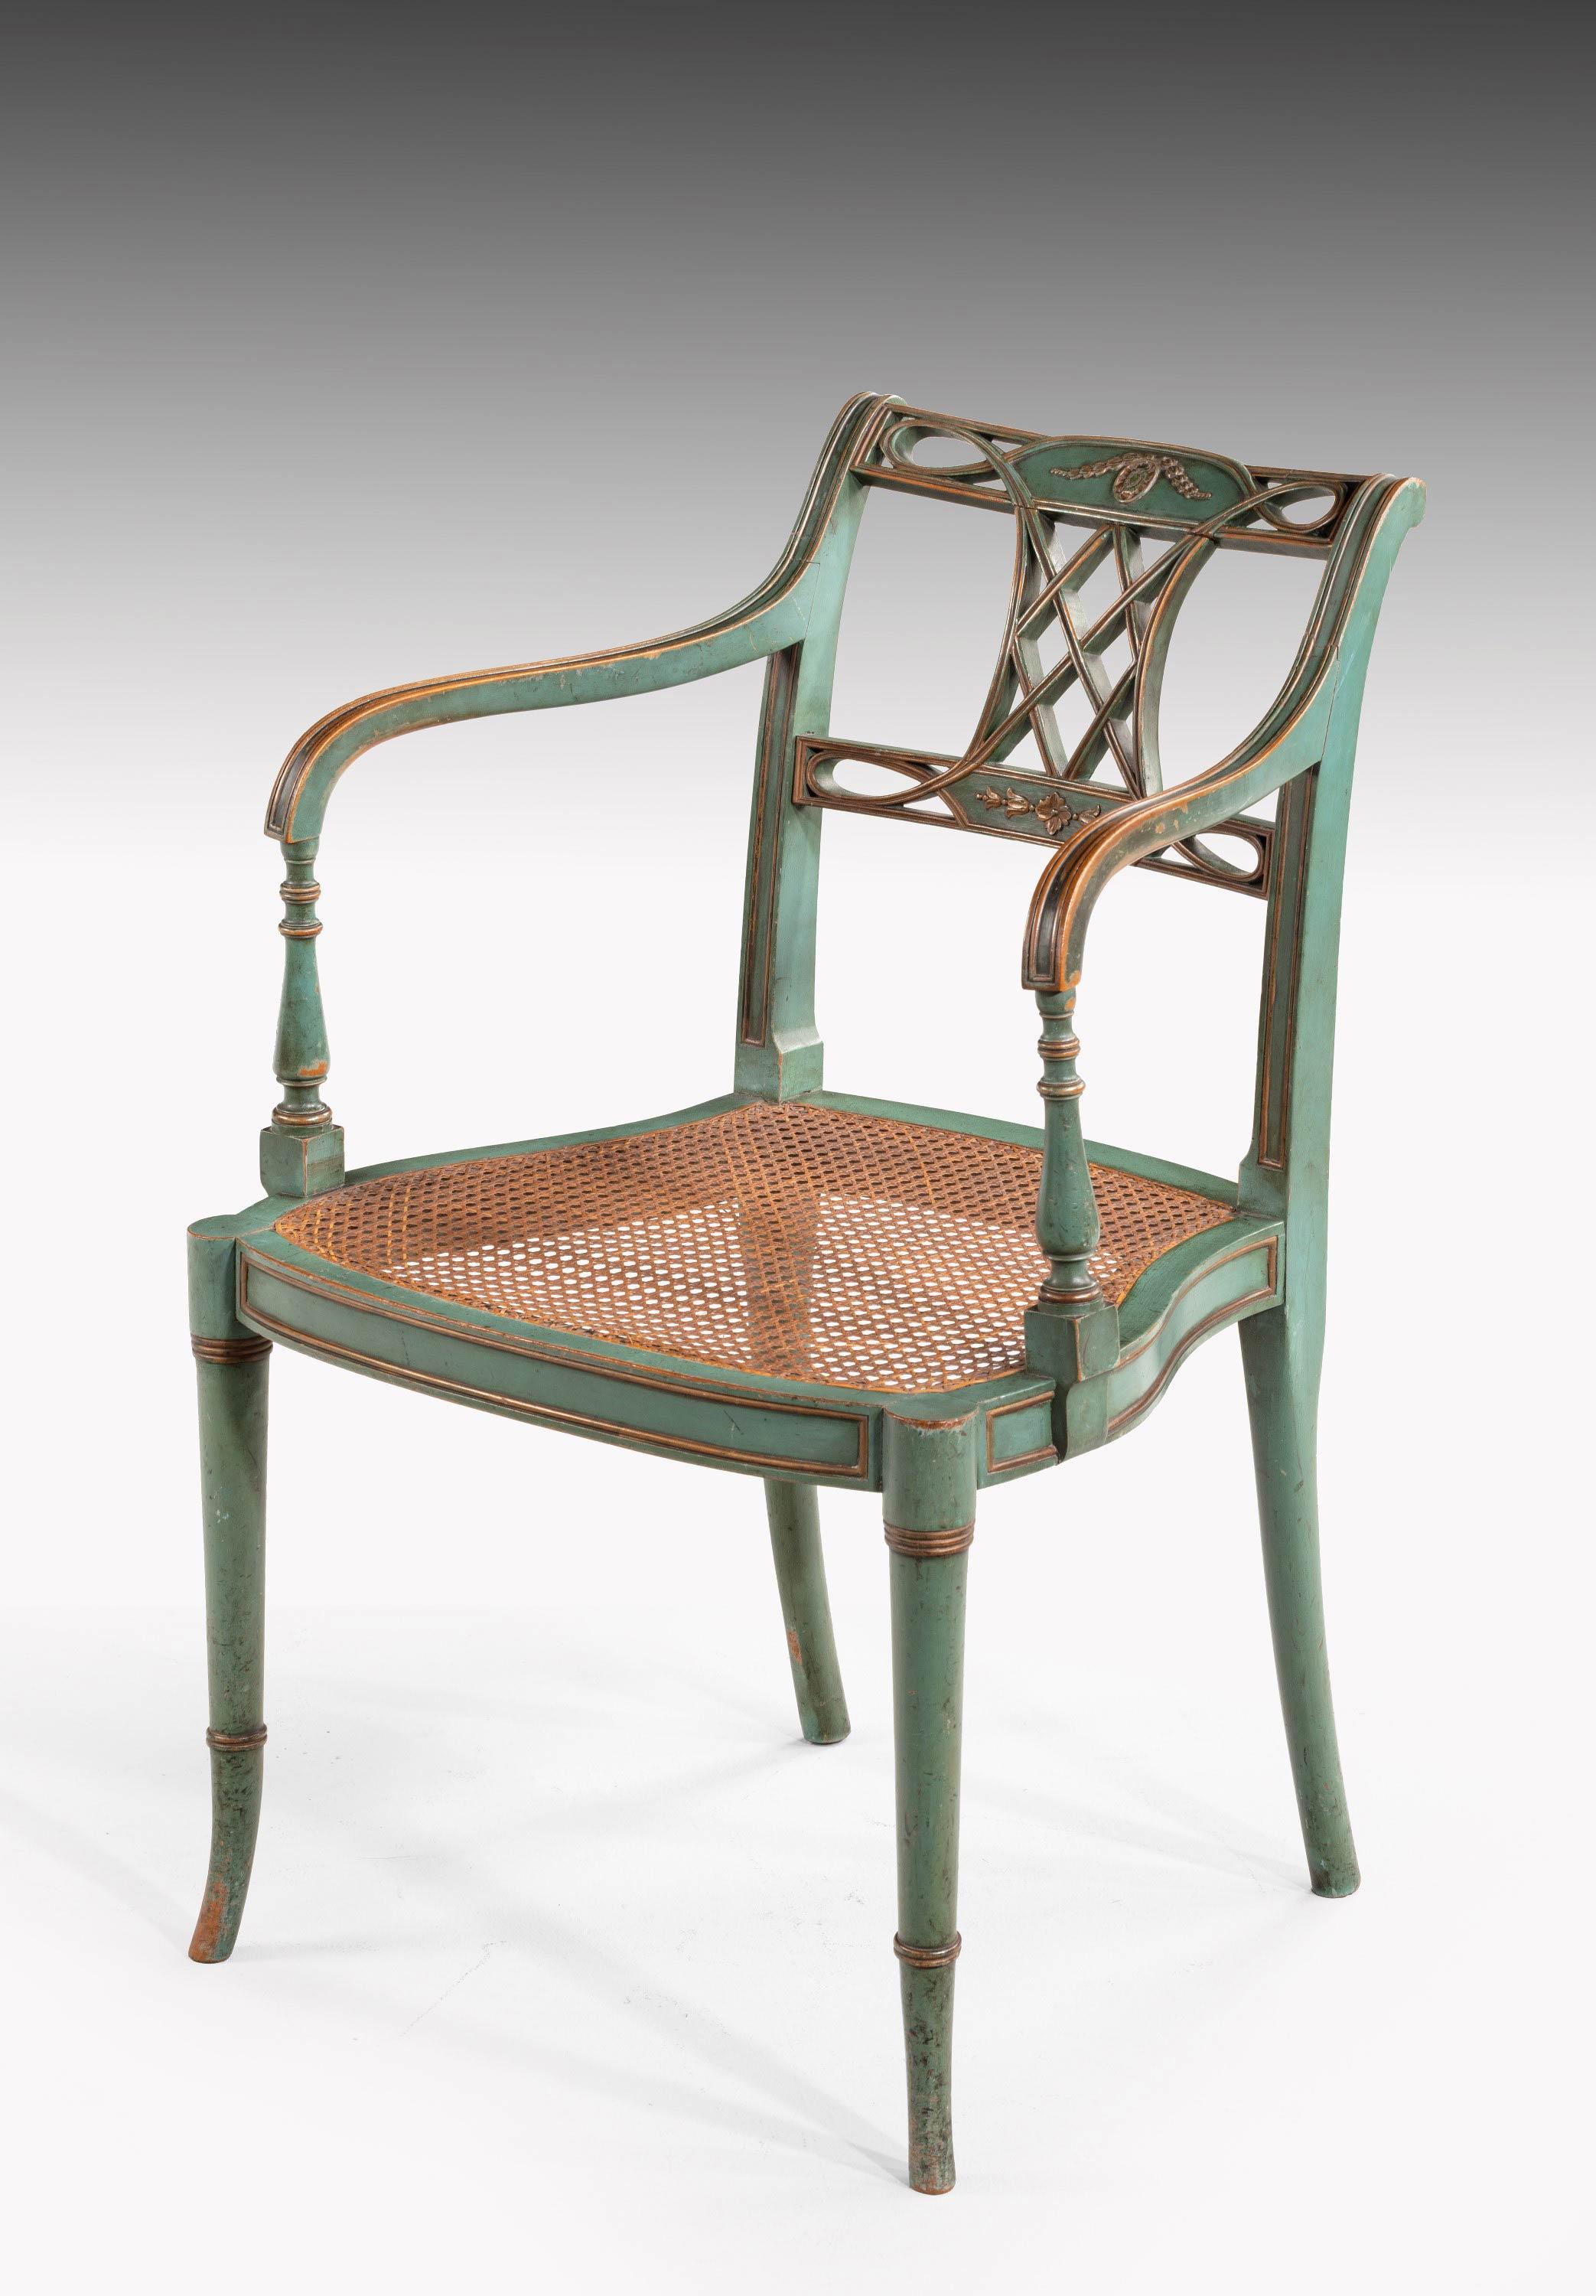 A most attractive and finely drawn pair of Regency period chairs retaining the original green paintwork now very slightly worn on the arms. Overall of elegant design.

Measures: Seat height 17 inches (43cm).